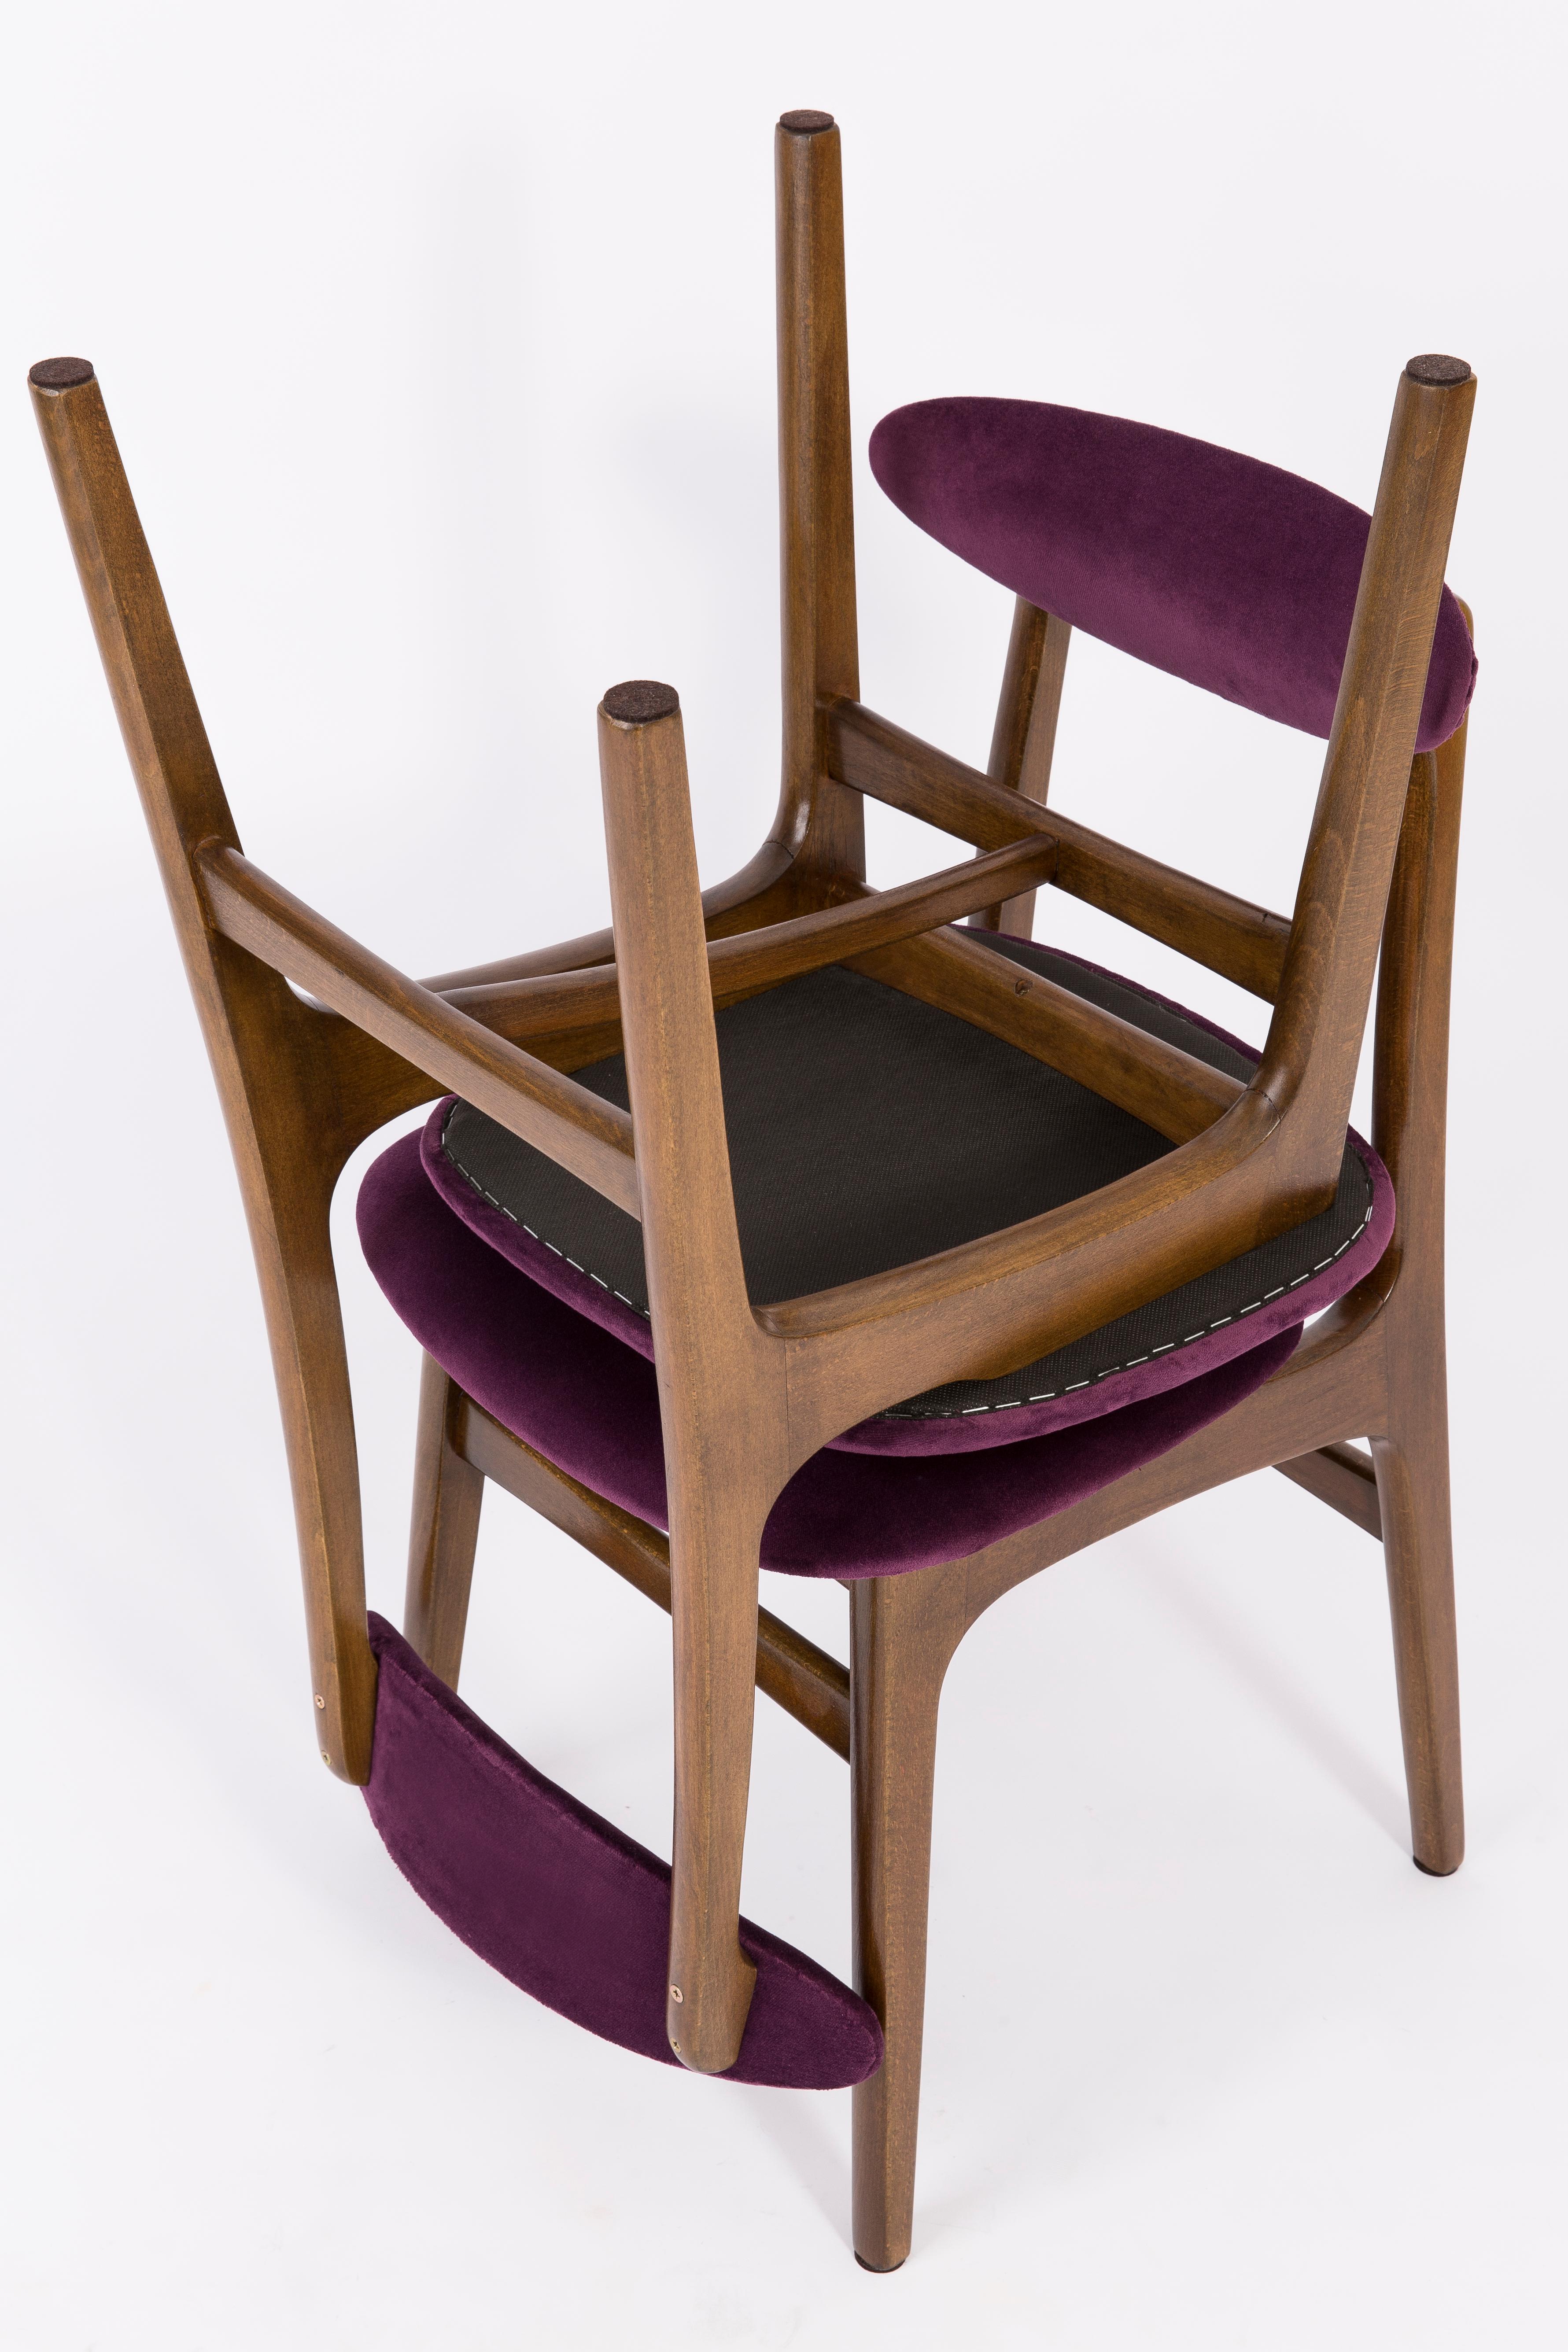 Hand-Crafted Set of Two 20th Century Plum Velvet Rajmund Halas Chairs, Europe, 1960s For Sale